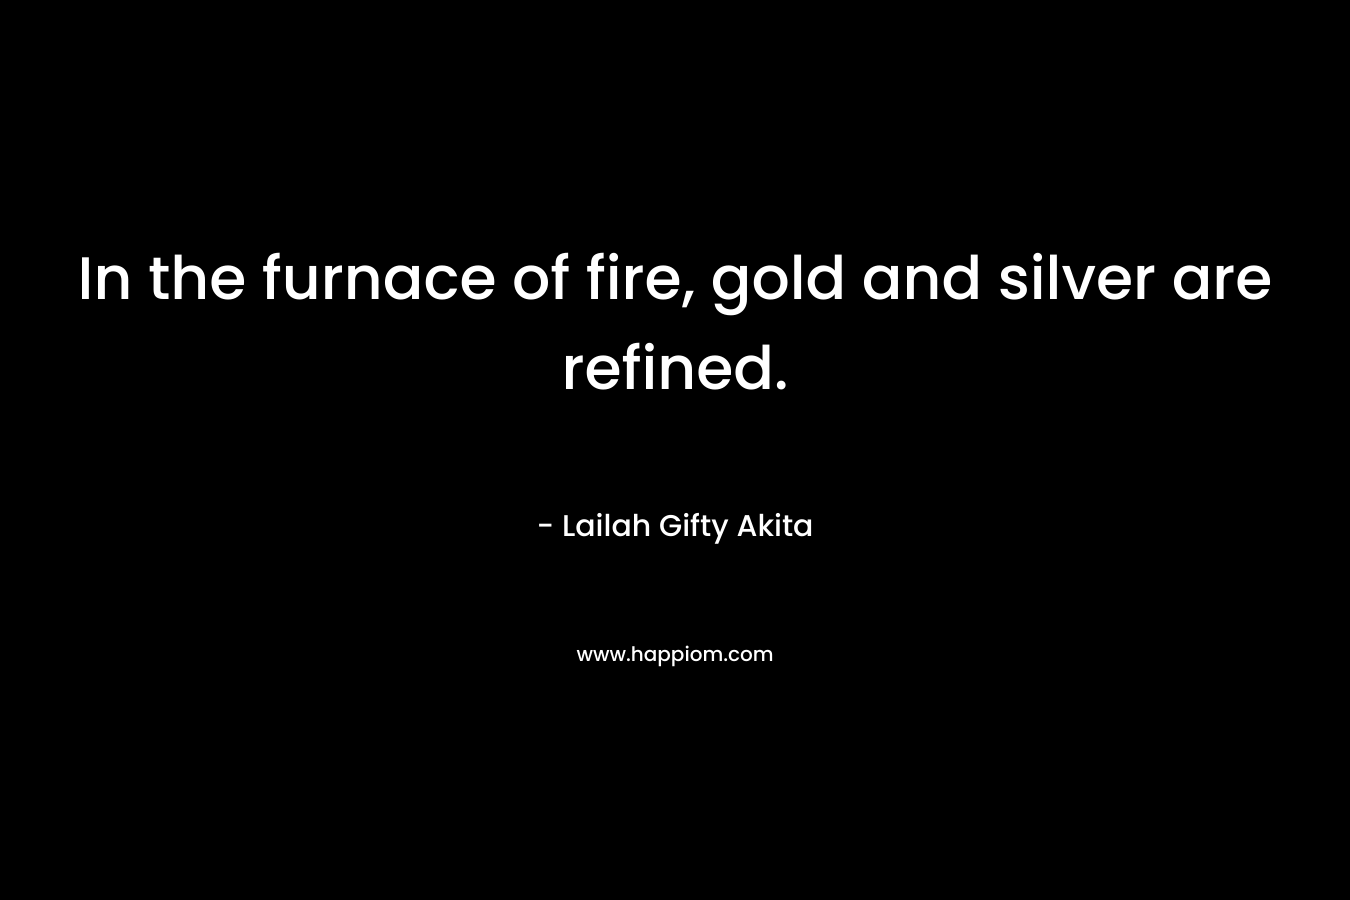 In the furnace of fire, gold and silver are refined. – Lailah Gifty Akita